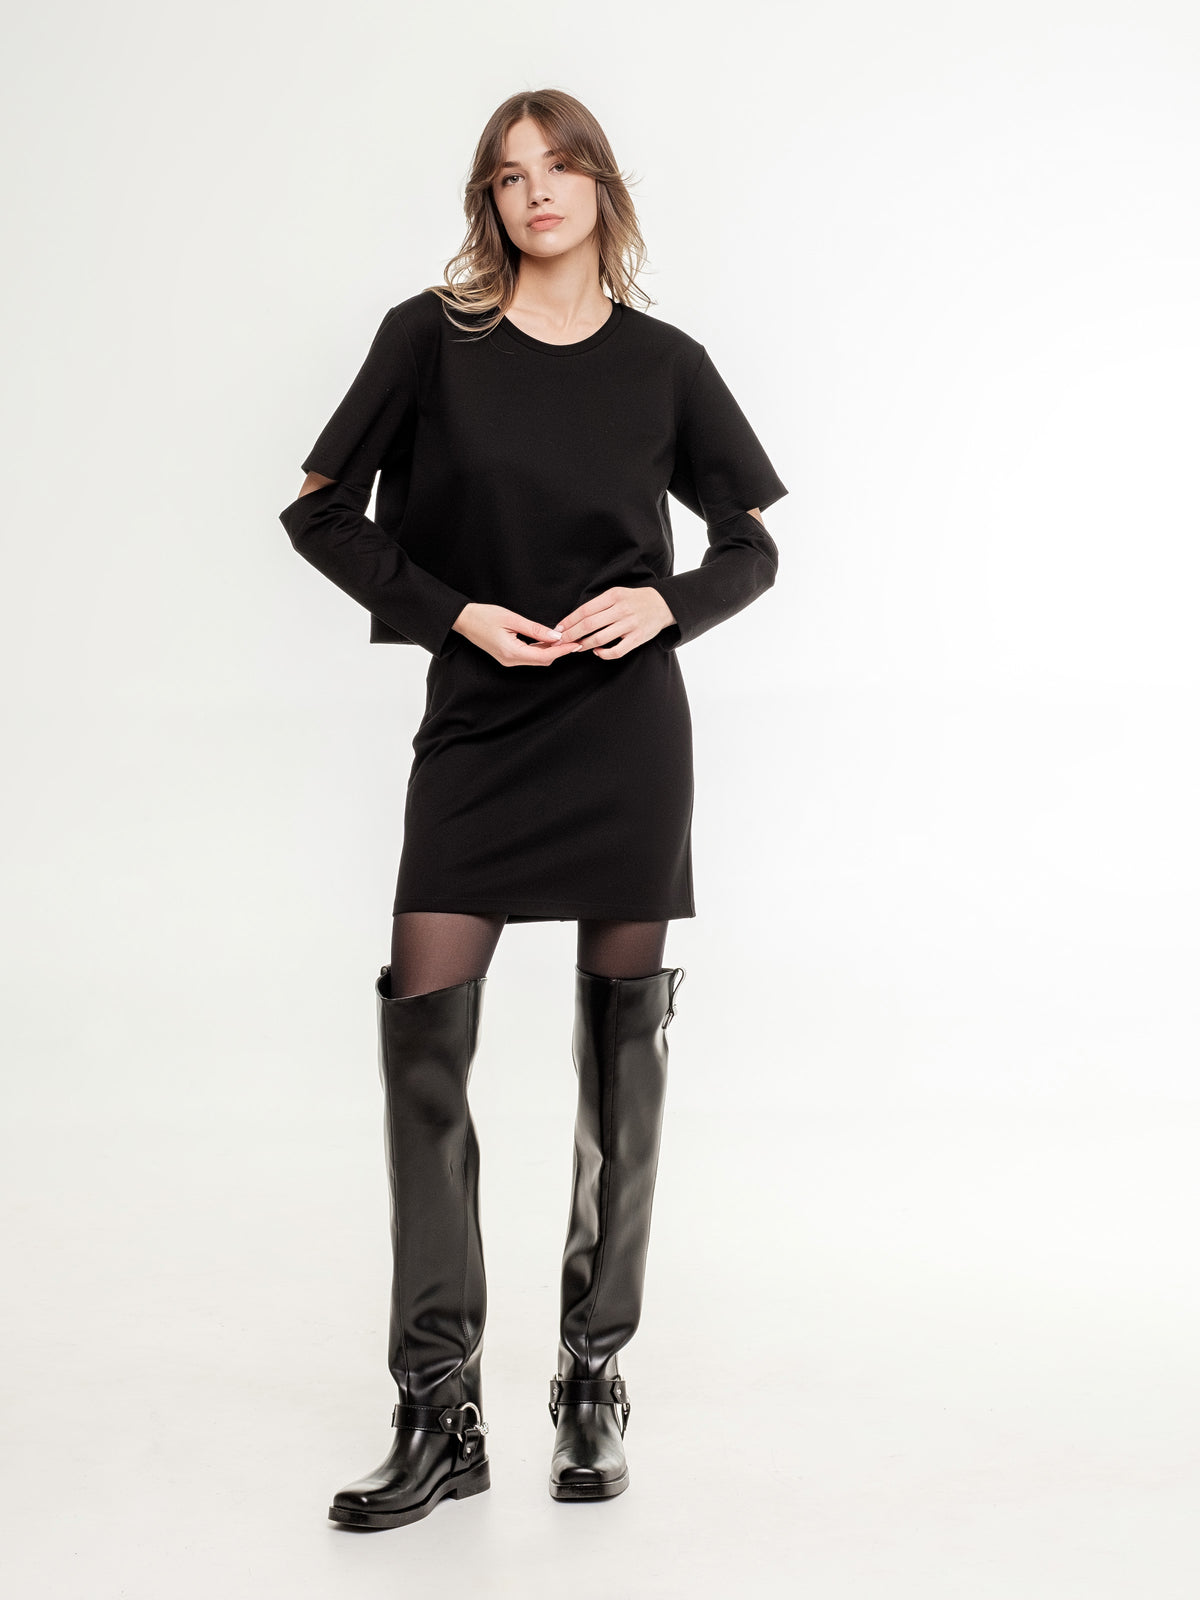 black top with long sleeves elbow cuts  and mini black skirt